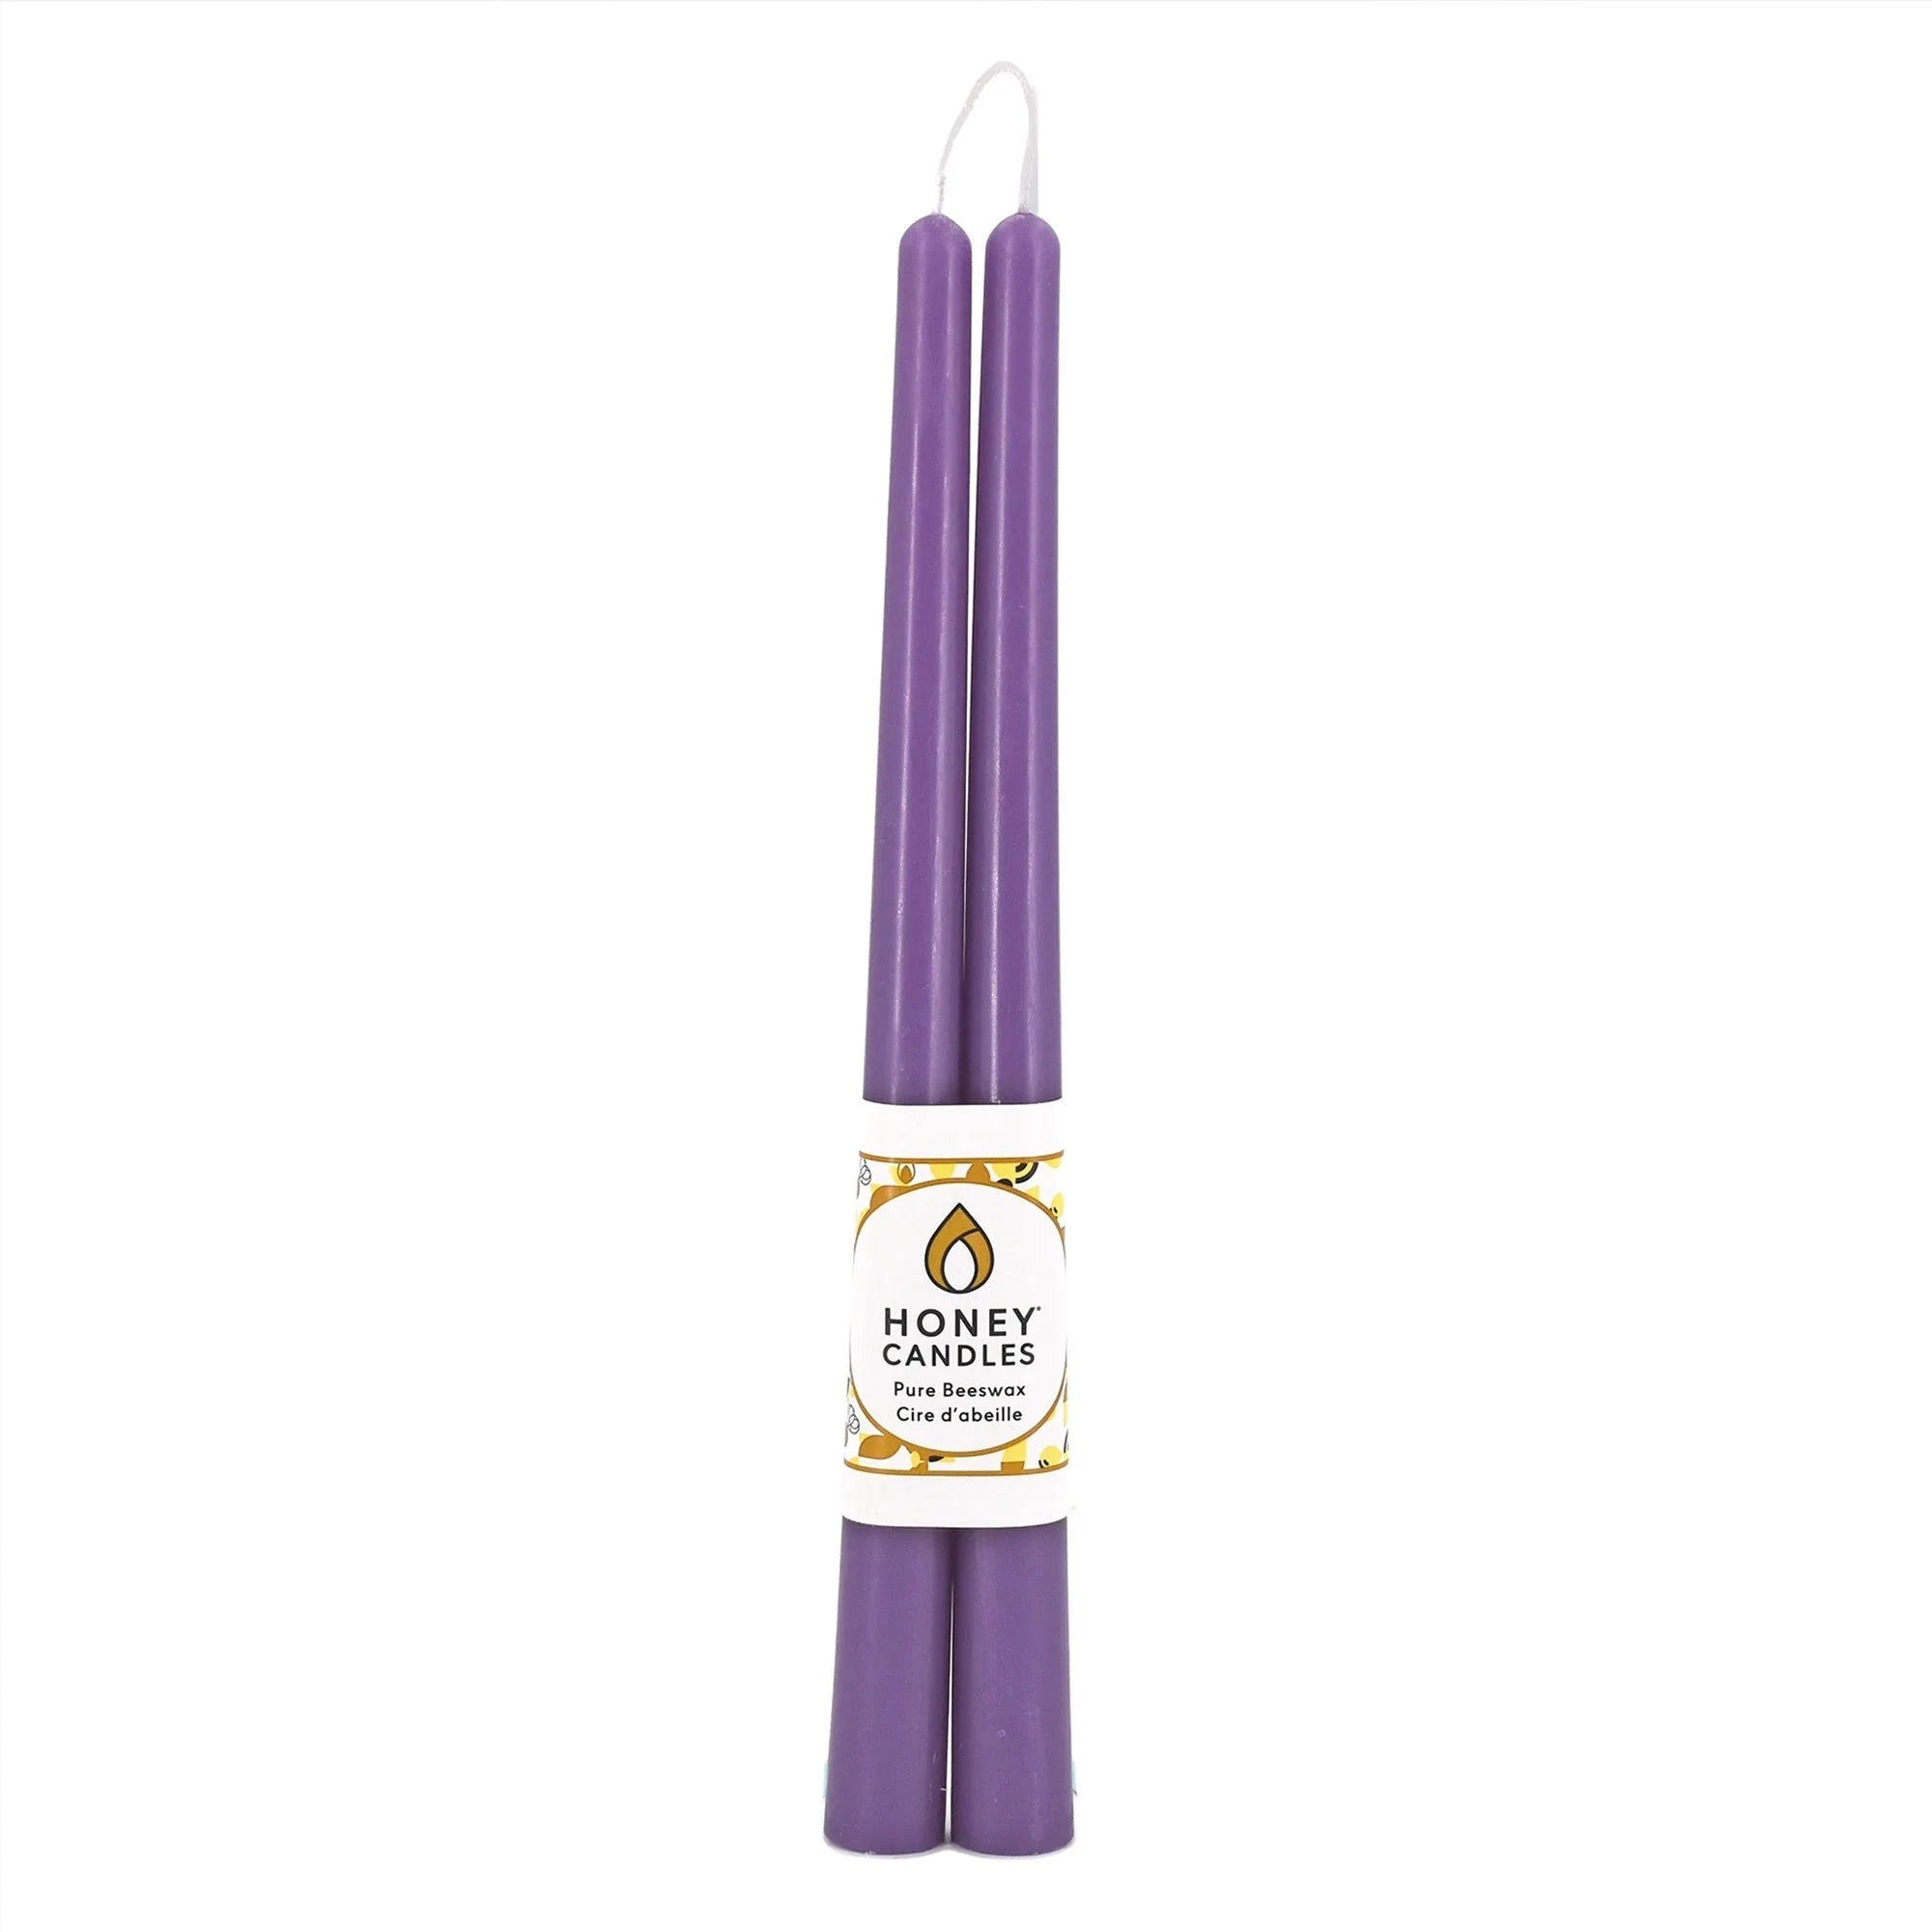 12" Taper Beeswax Candles - Spring Crocus